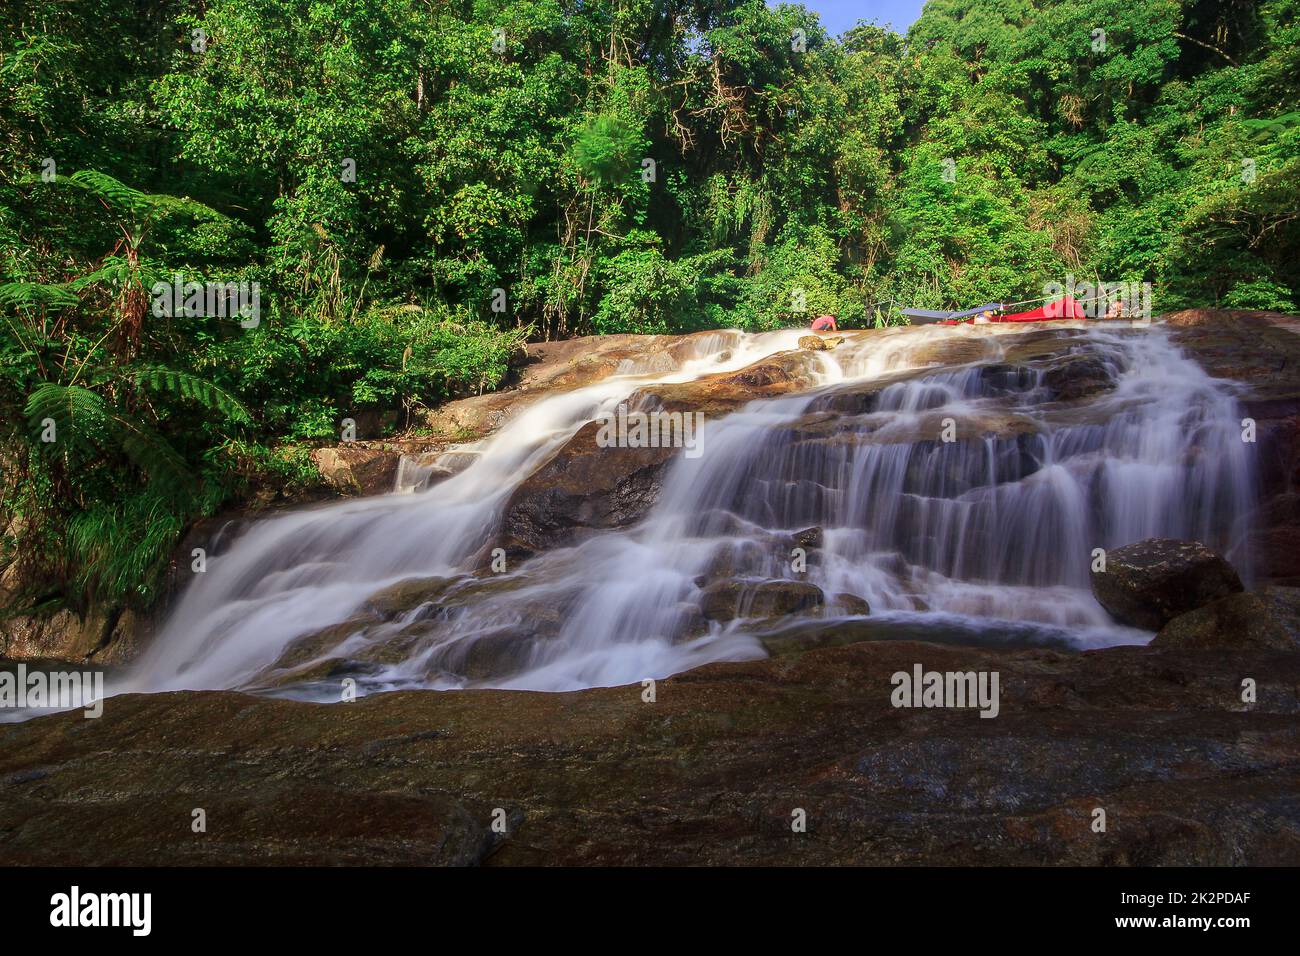 Nan Sung Waterfall is an eco-tourism attraction of Phatthalung Province, Thailand. Stock Photo